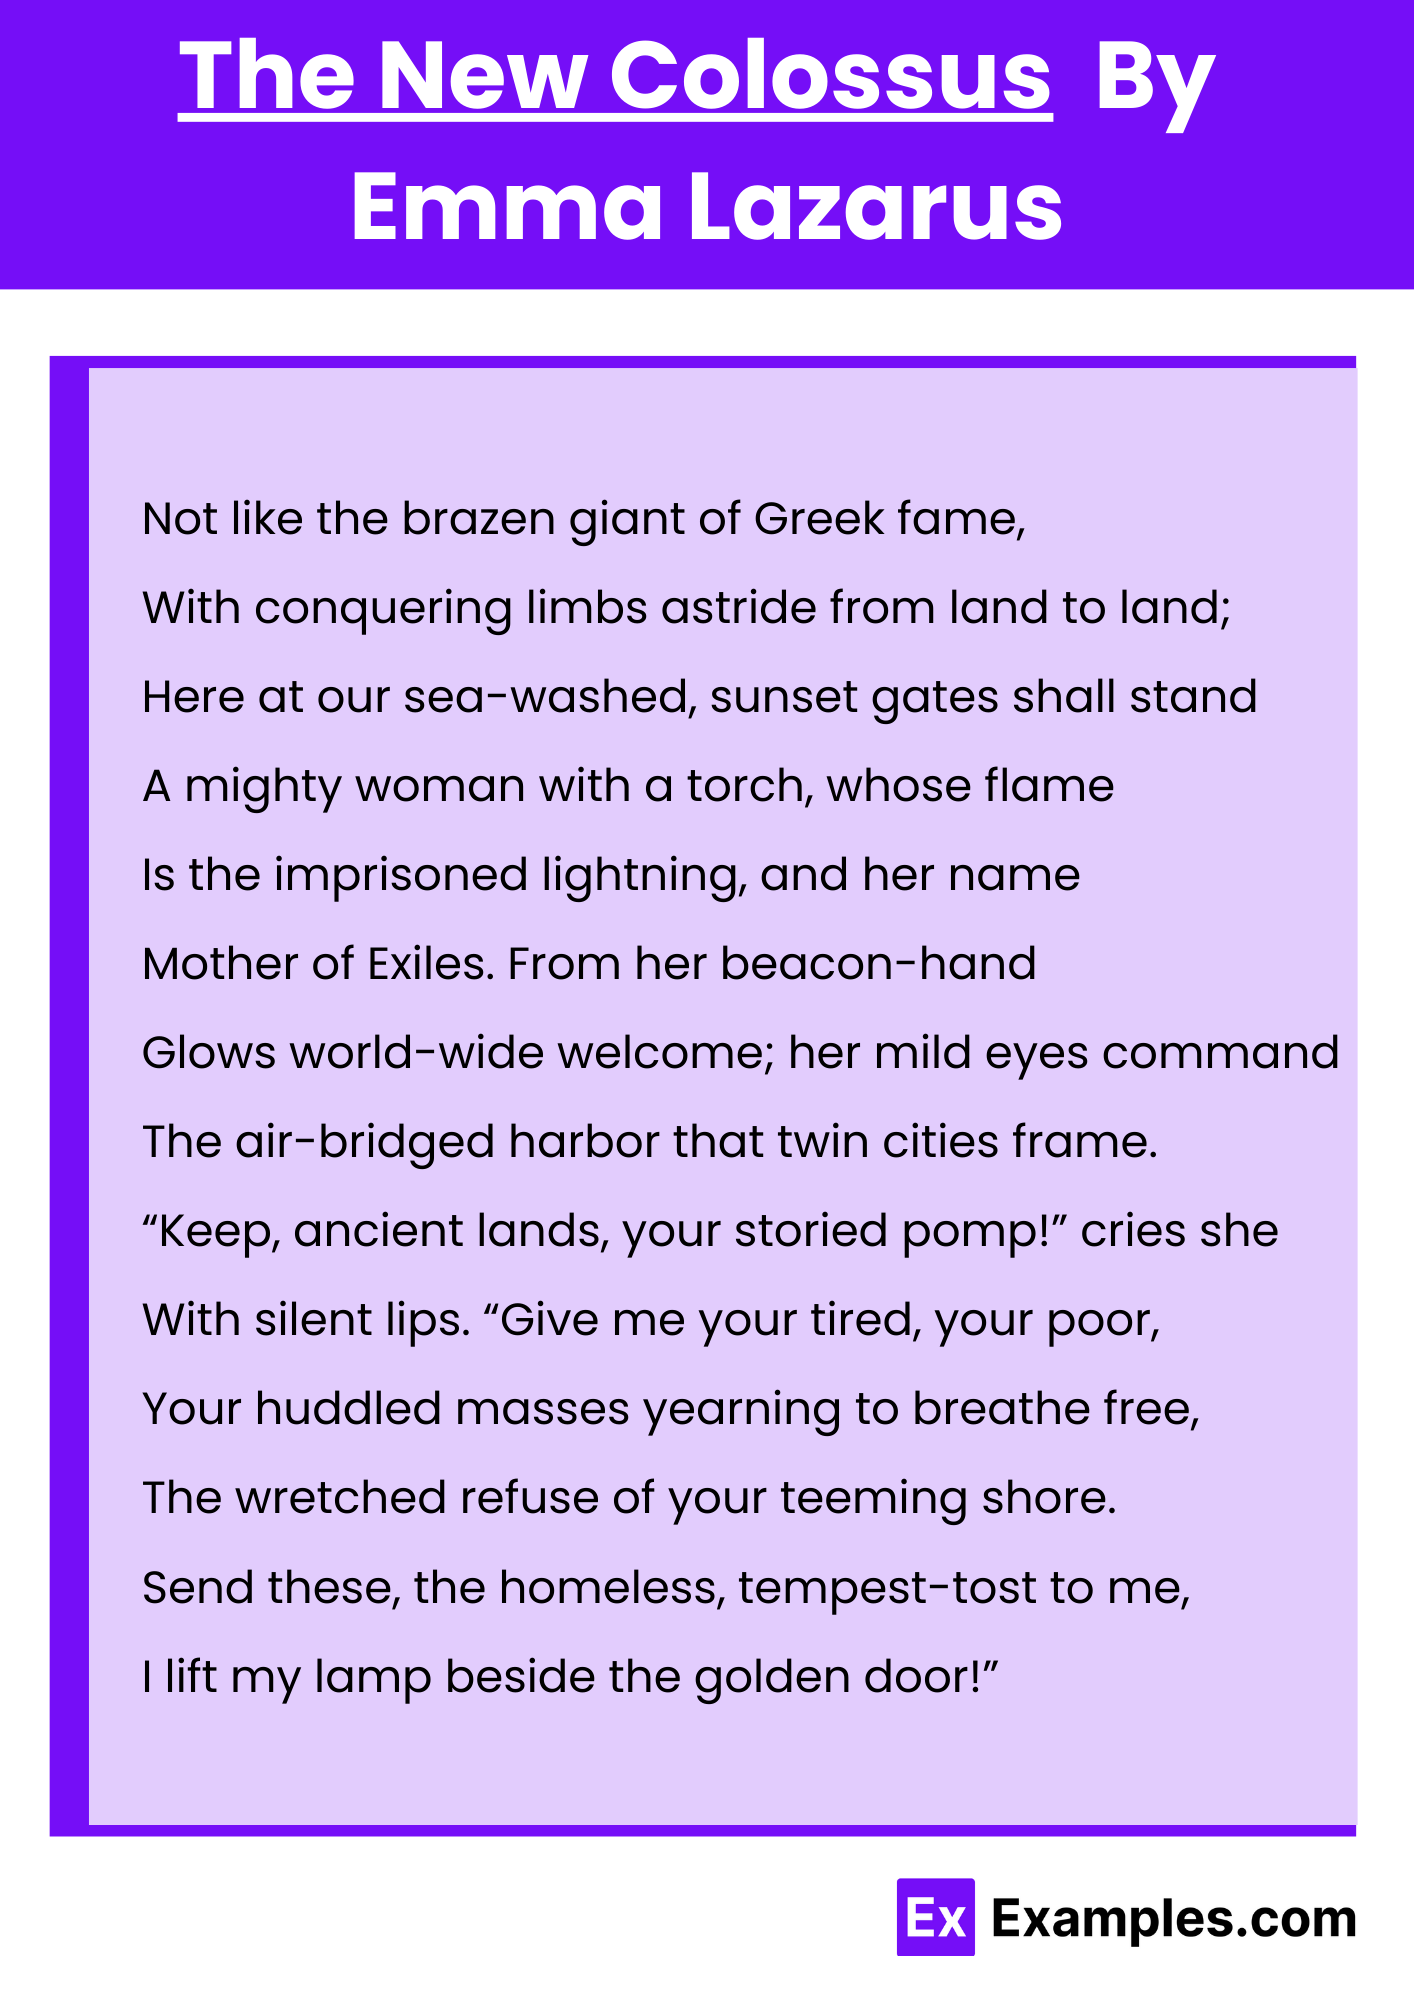 The New Colossus By Emma Lazarus